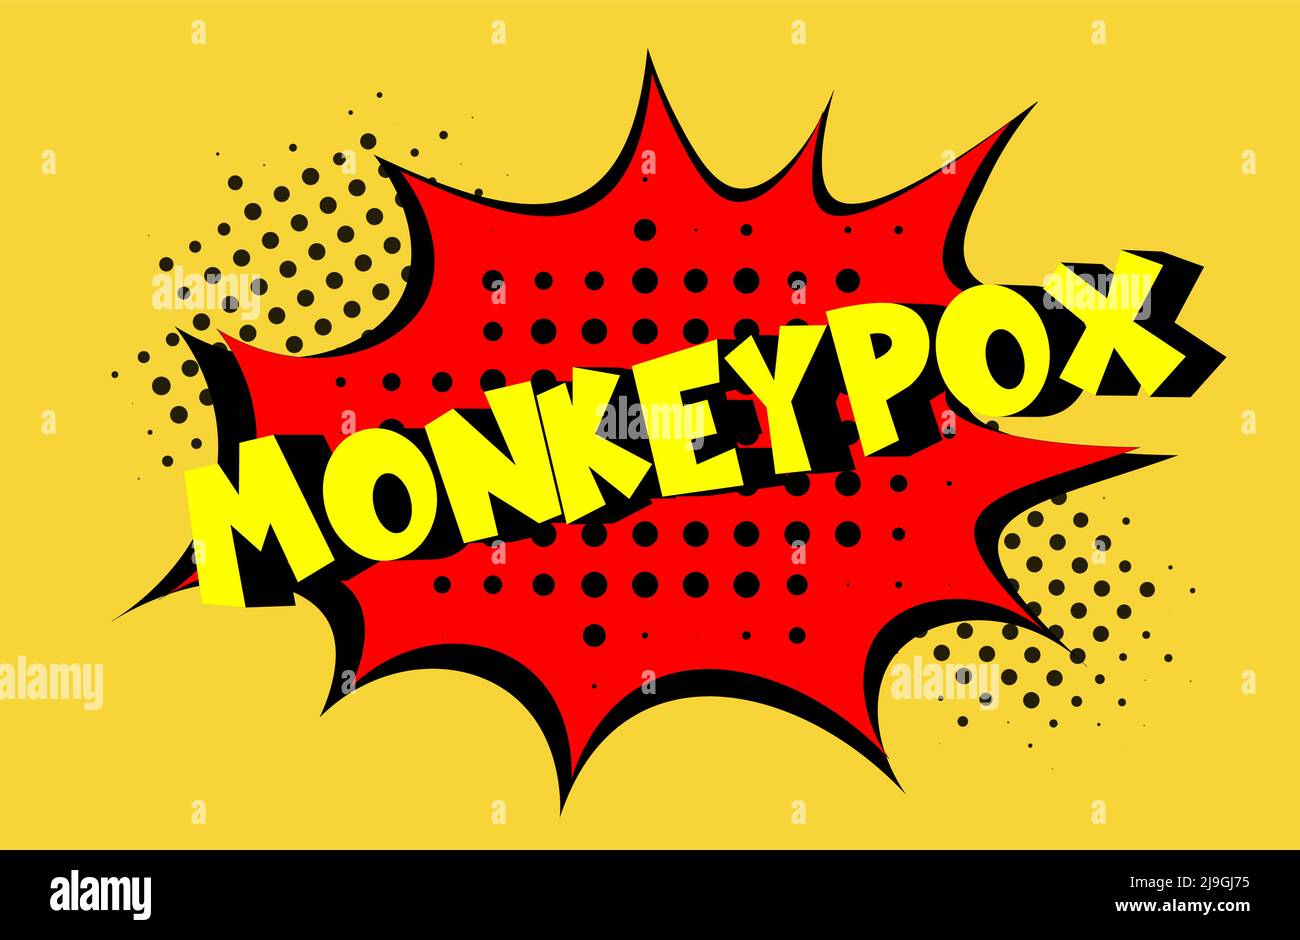 MONKEYPOX VIRUS vector comic halftone style illustration - Monkeypox is a zoonotic viral disease that can infect human, nonhuman primates and rodents Stock Vector